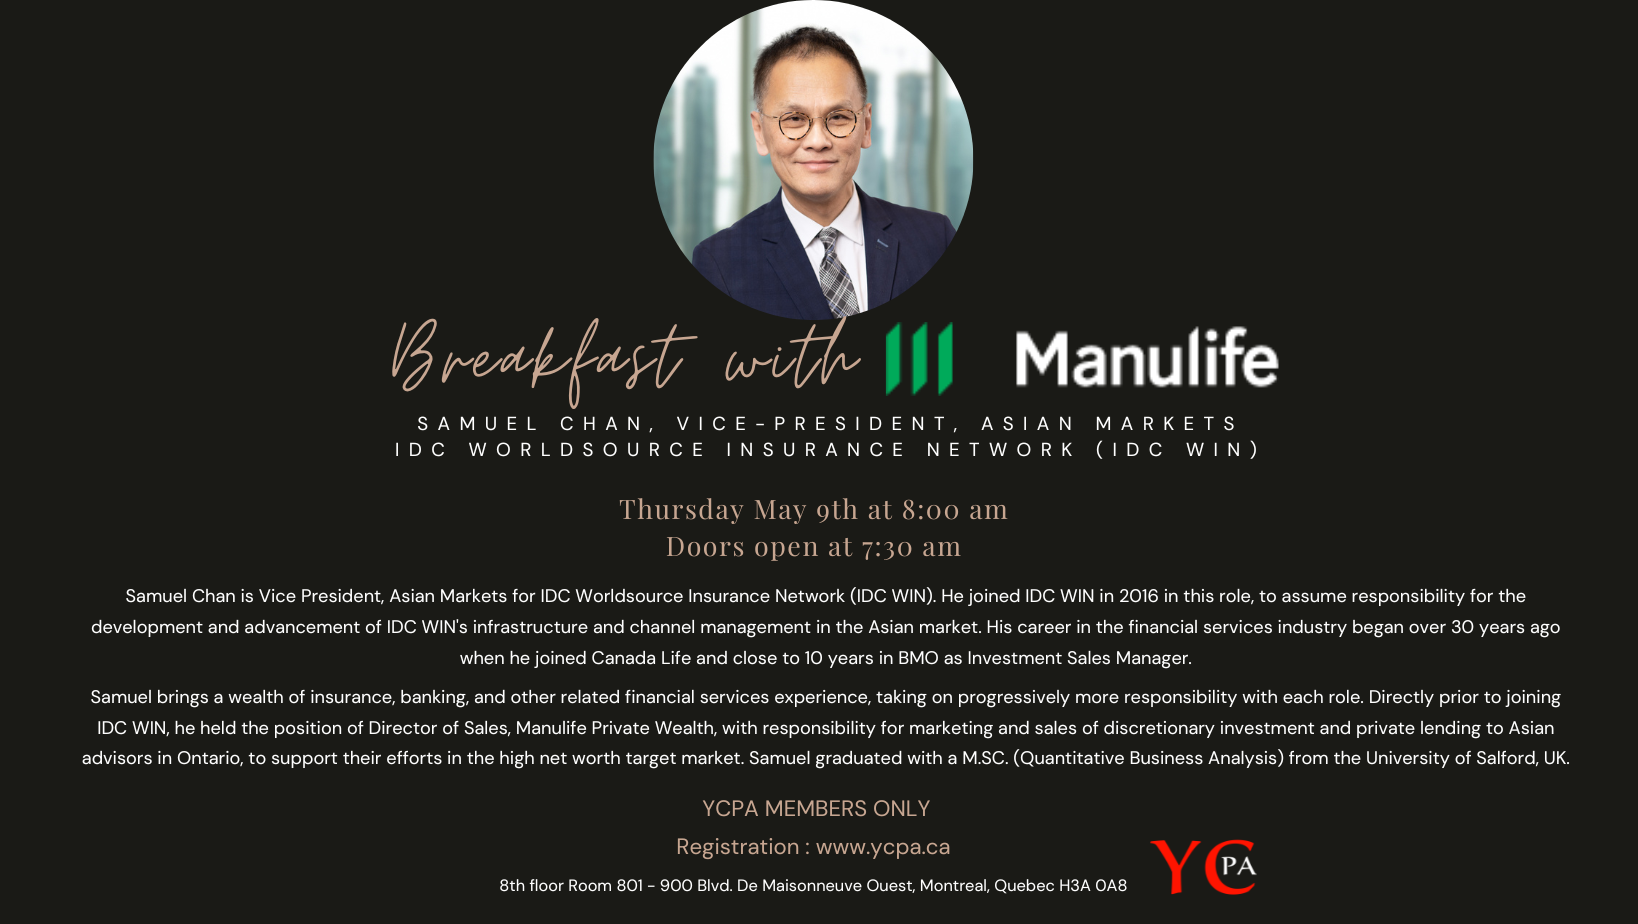 Breakfast with Manulife - Samuel Chan, Vice-President, Asian Markets IDC Worldsource Insurance Network (IDC WIN)